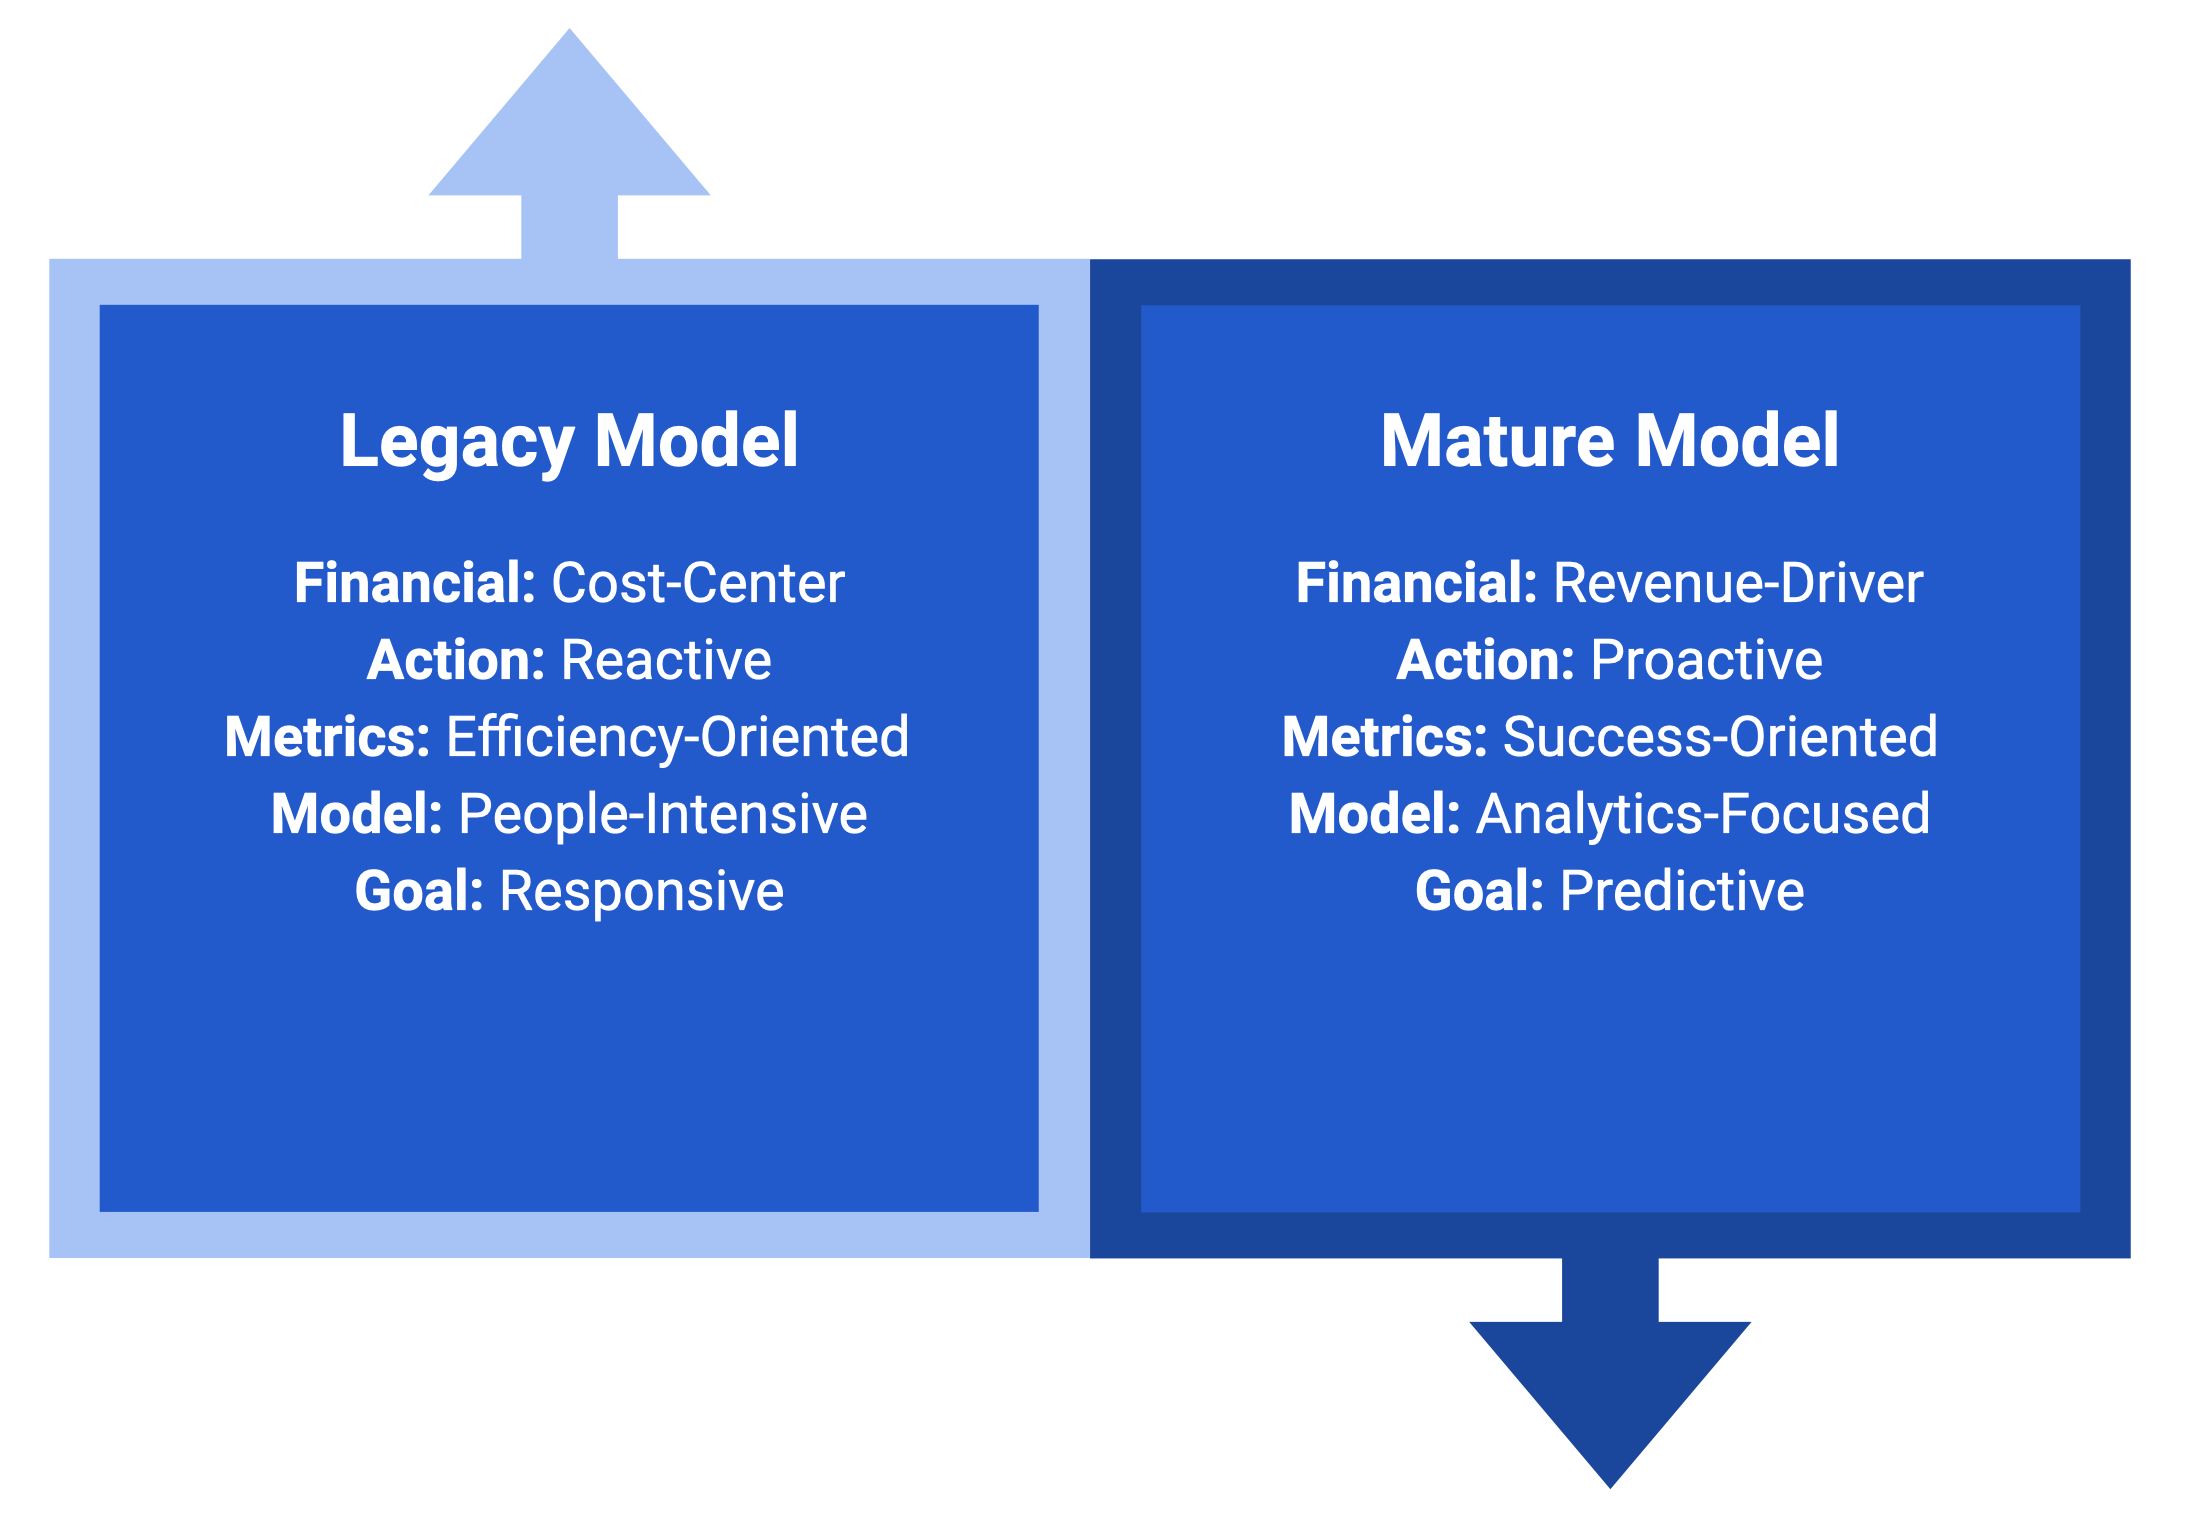 Legacy and Mature Models